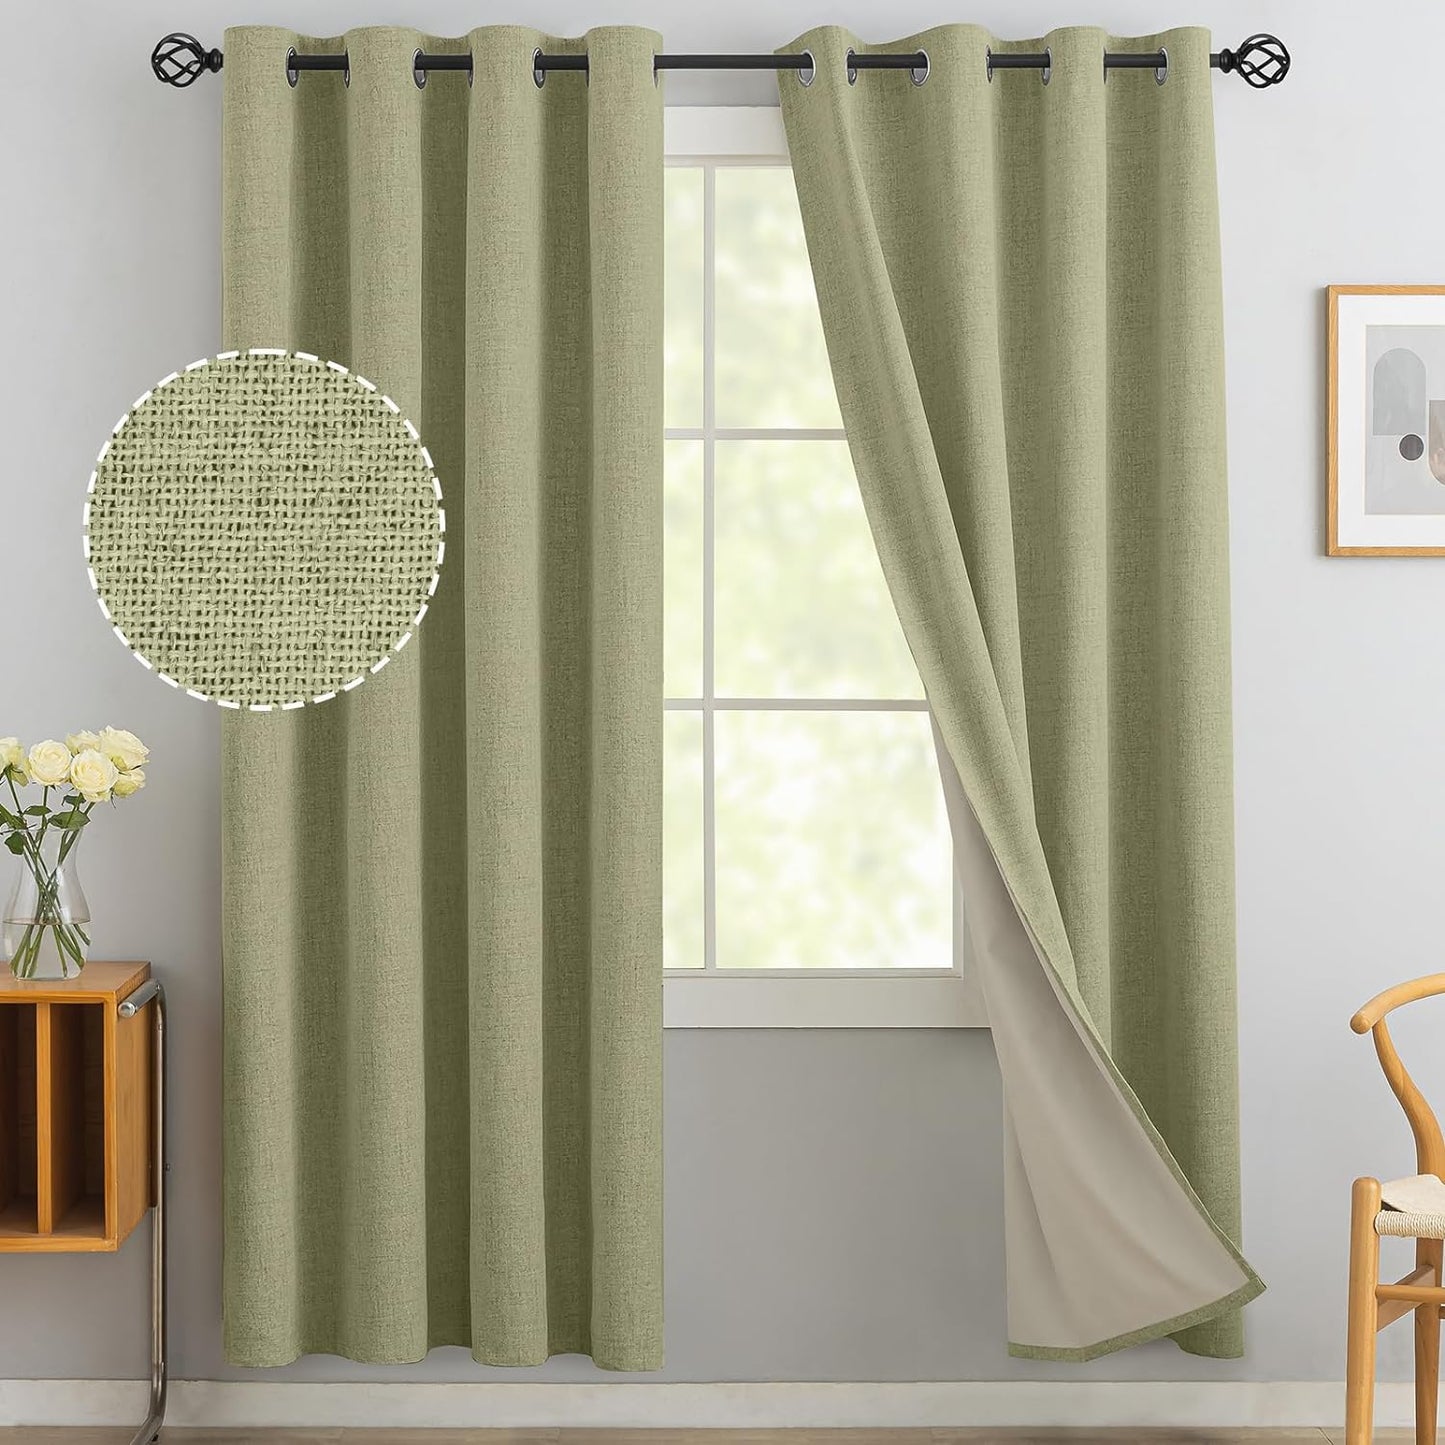 Yakamok Natural Linen Curtains 100% Blackout 84 Inches Long,Room Darkening Textured Curtains for Living Room Thermal Grommet Bedroom Curtains 2 Panels with Greyish White Liner  Yakamok Sage Green 52W X 72L / 2 Panels 